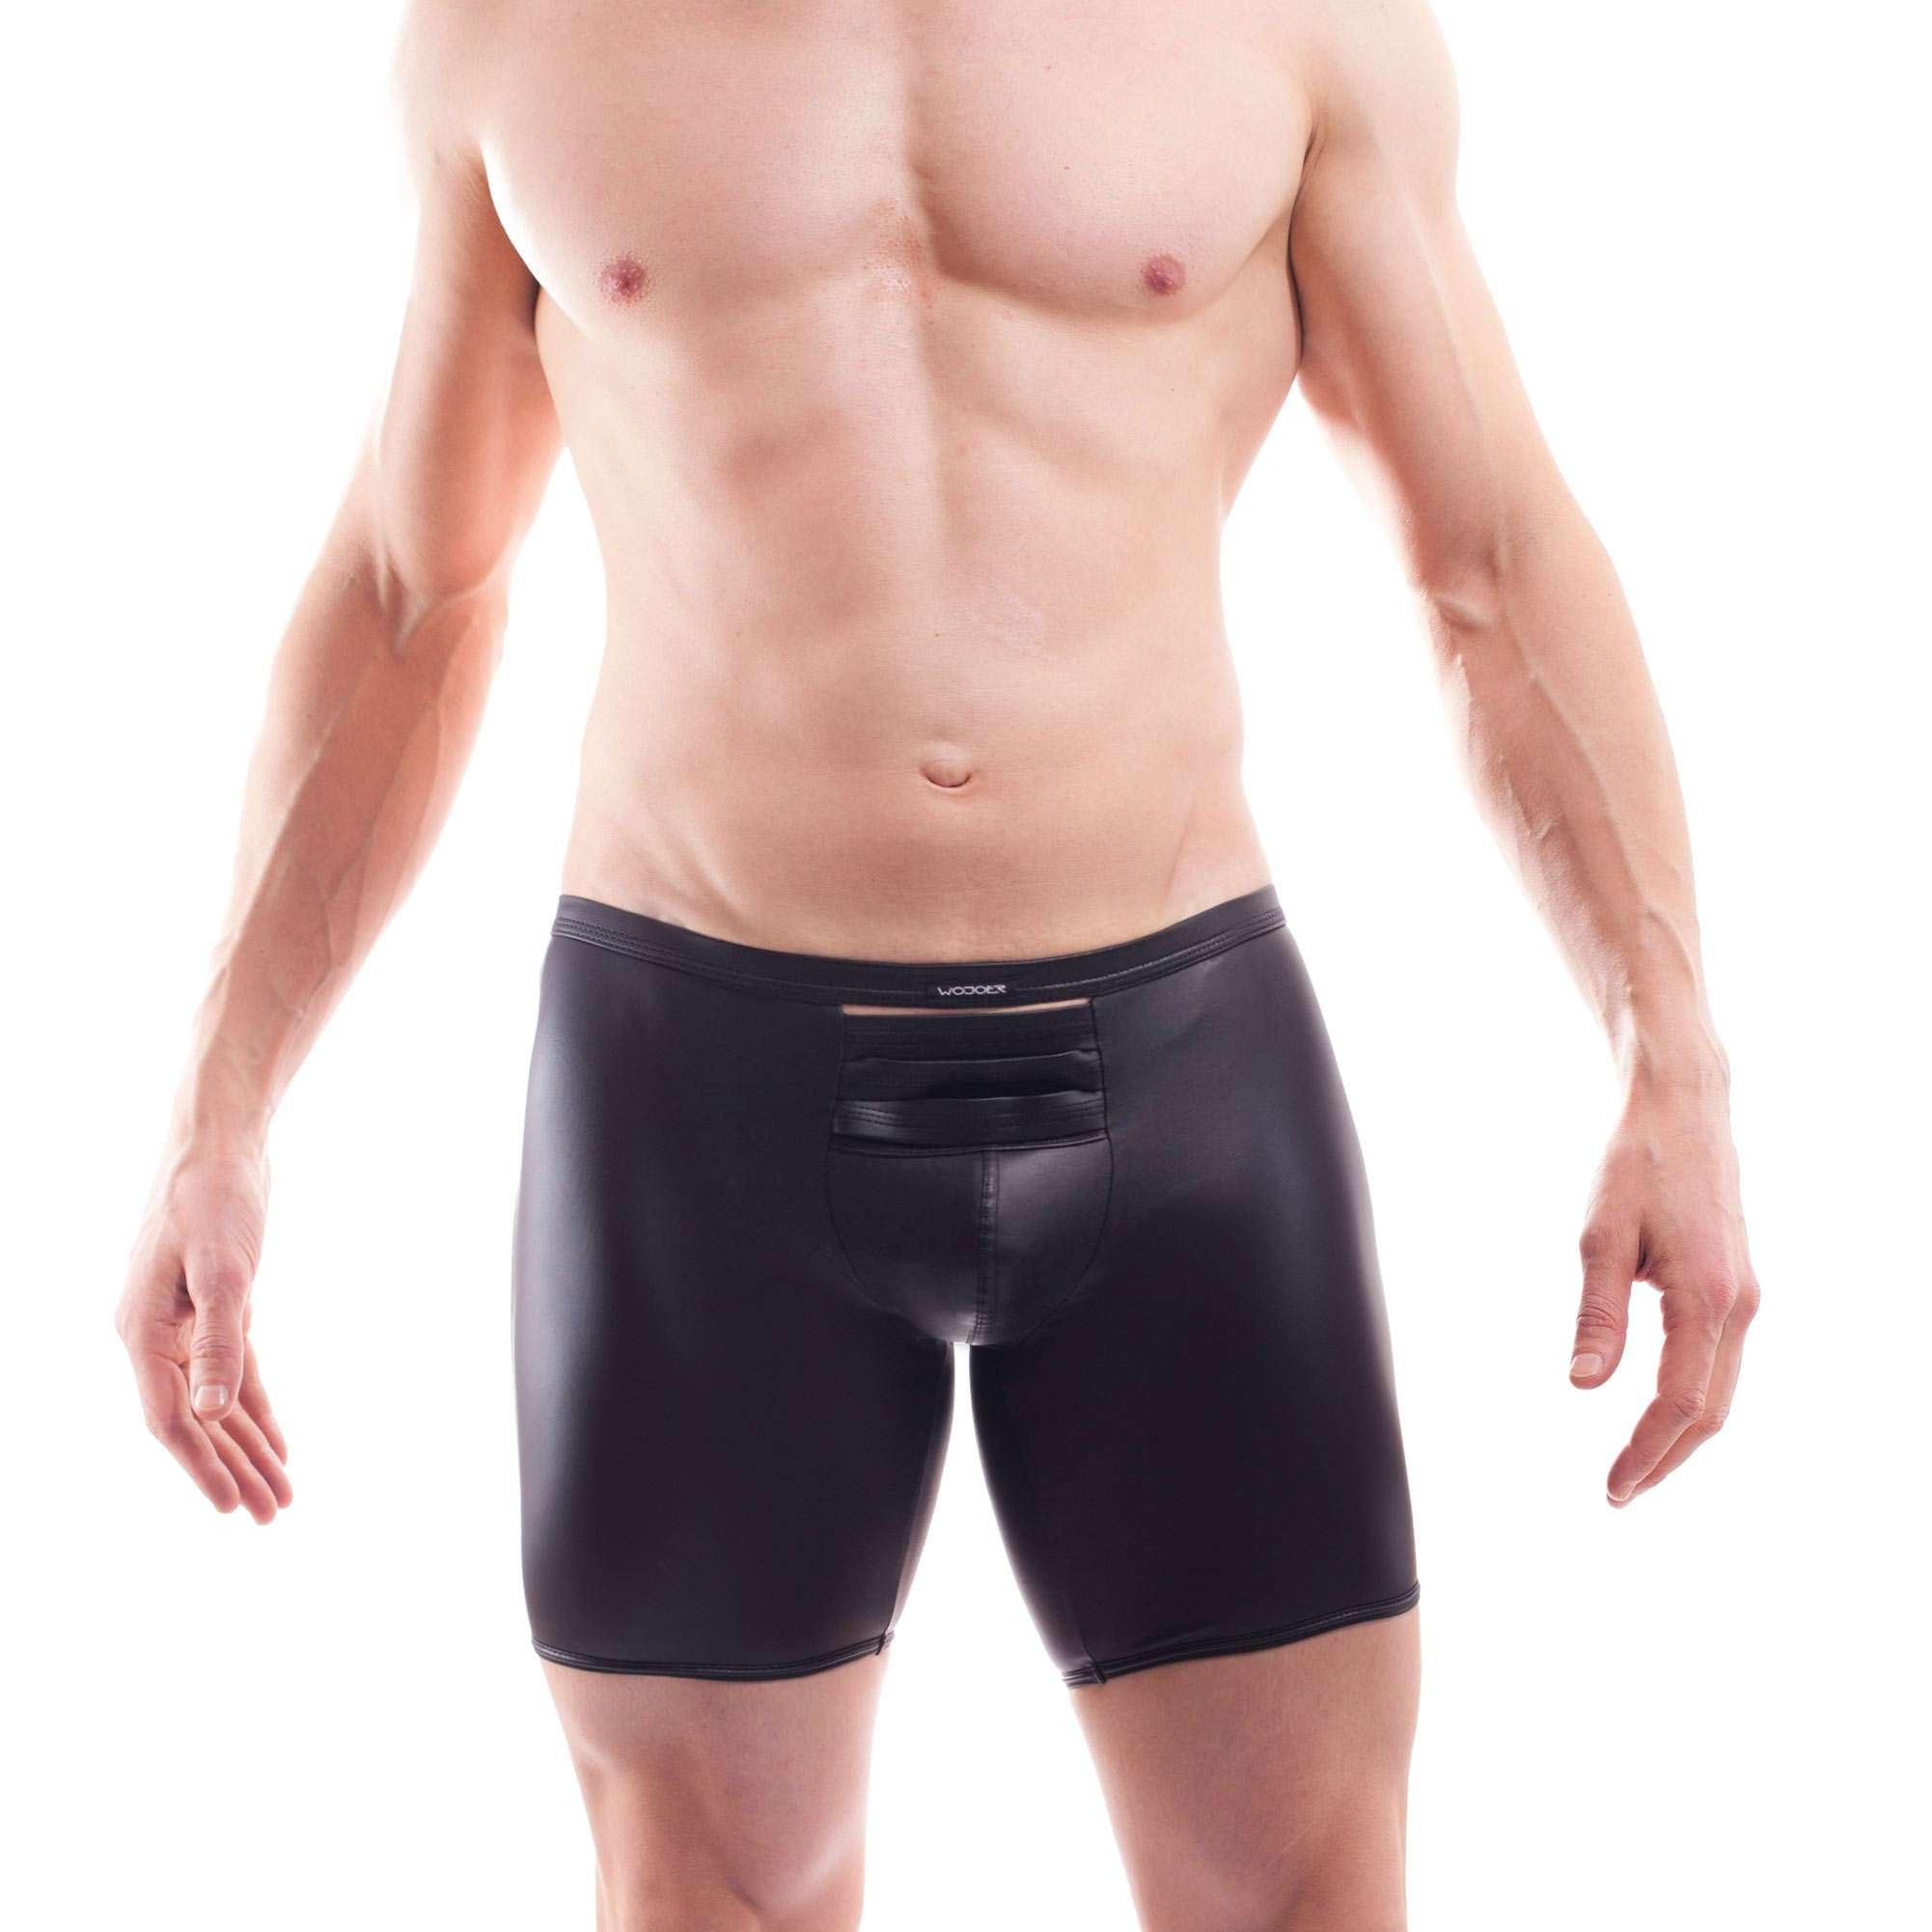 The neoprene ouverte string 309B17BW is one of the Wojoer LIVE effects. You will be settled with us. So, we can respond to customer requests.
Sizes
Available in sizes S, M, L, XL
Material composition
100% smooth skin neoprene

Inner lining: 80% polyamide, 20% elastane
particularities
LIVE…